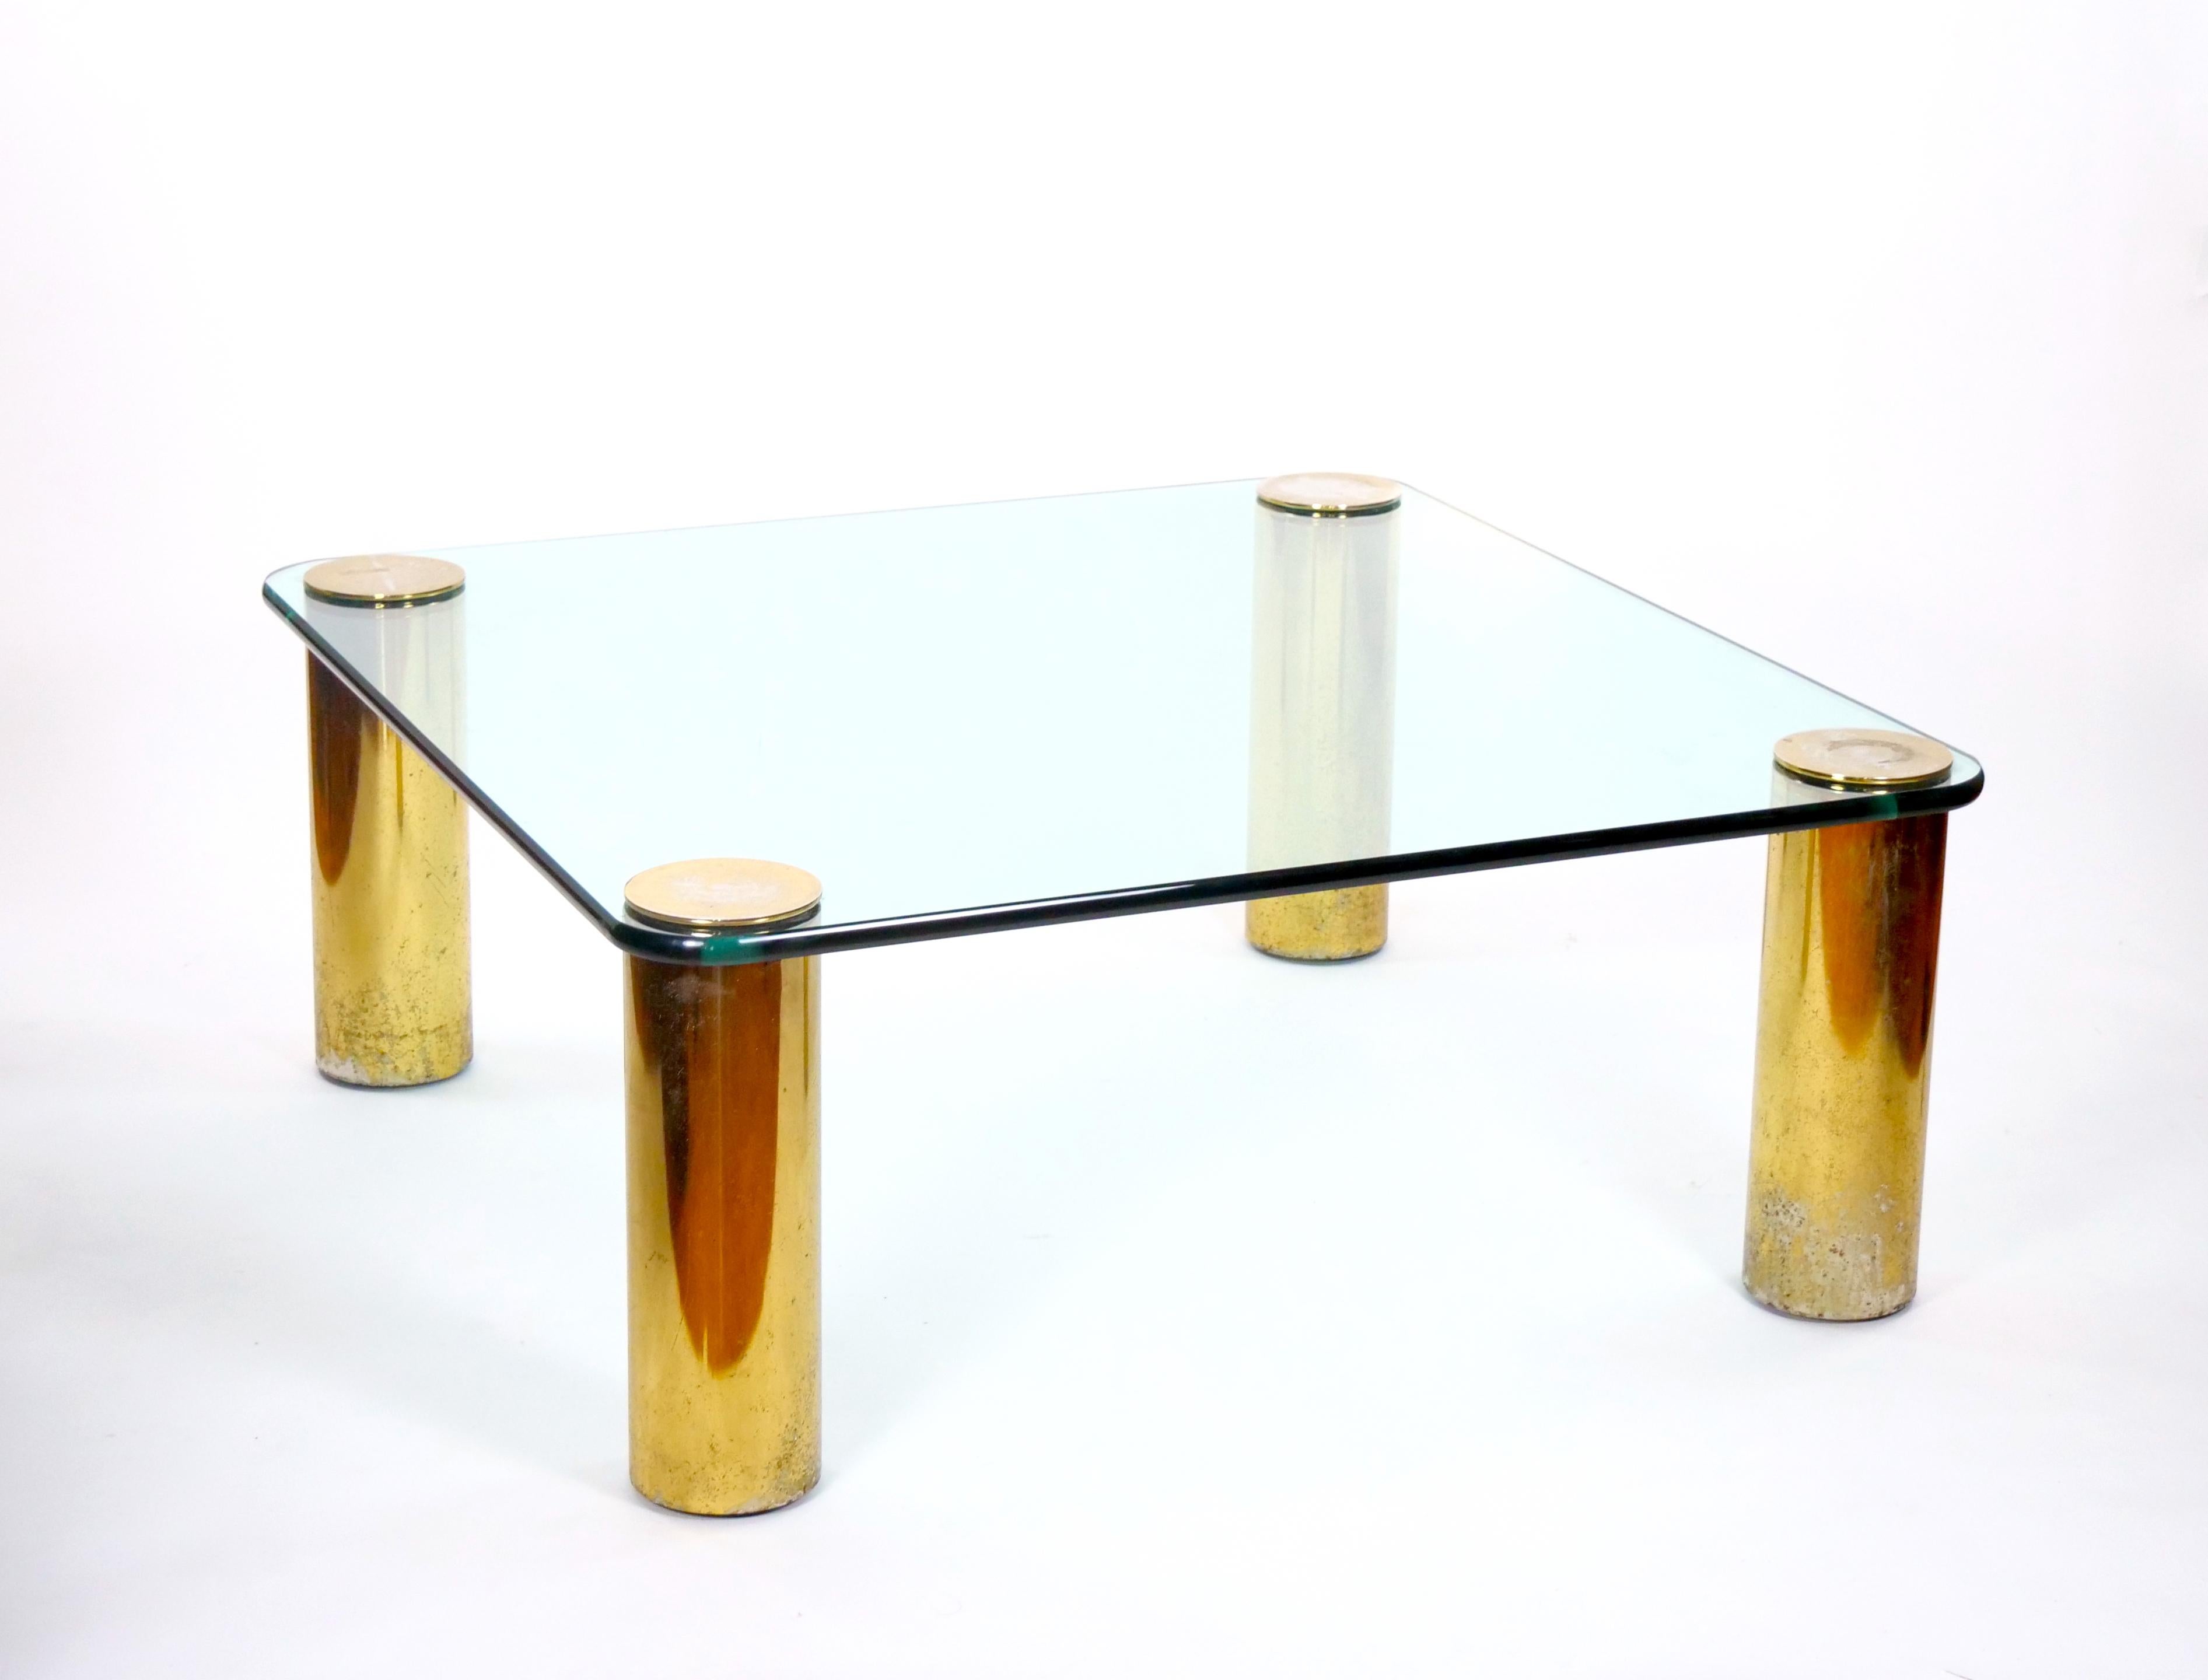 Introducing a stunning late 20th-century cocktail table that seamlessly embodies mid-century modern style, attributed to the prestigious Pace Collection. This exquisite piece features a heavy glass top gracefully balanced on four brass column pole